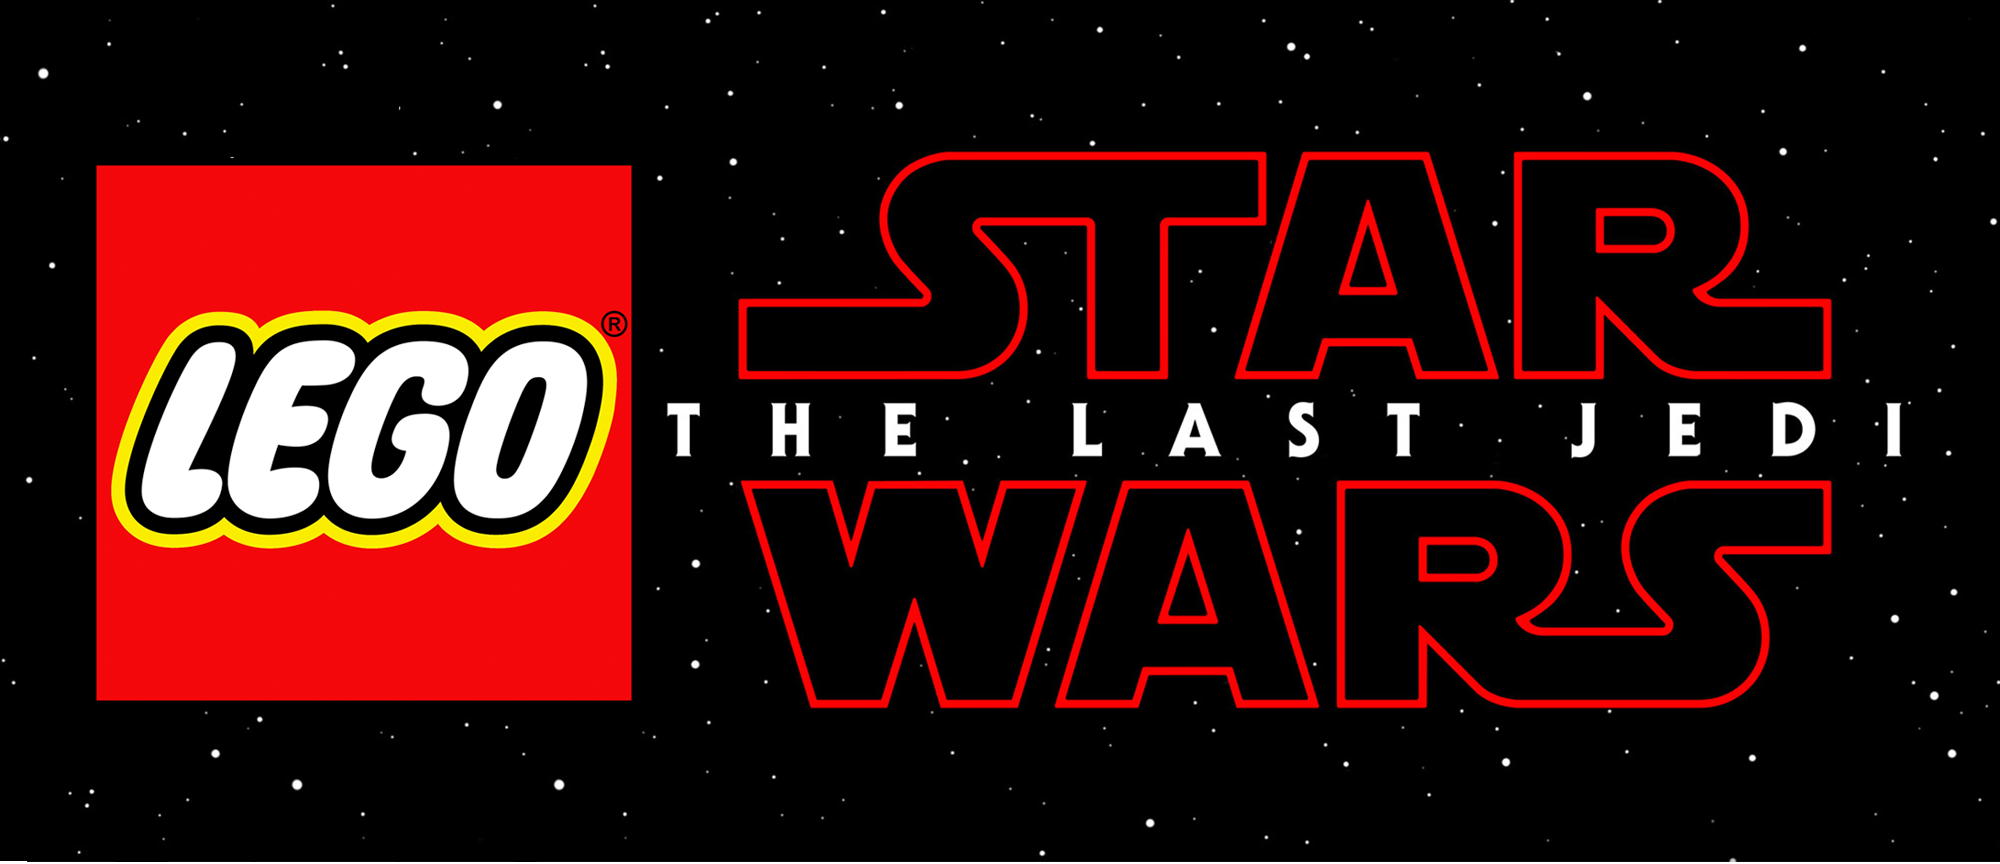 New video games, updates for 'Star Wars: The Last Jedi